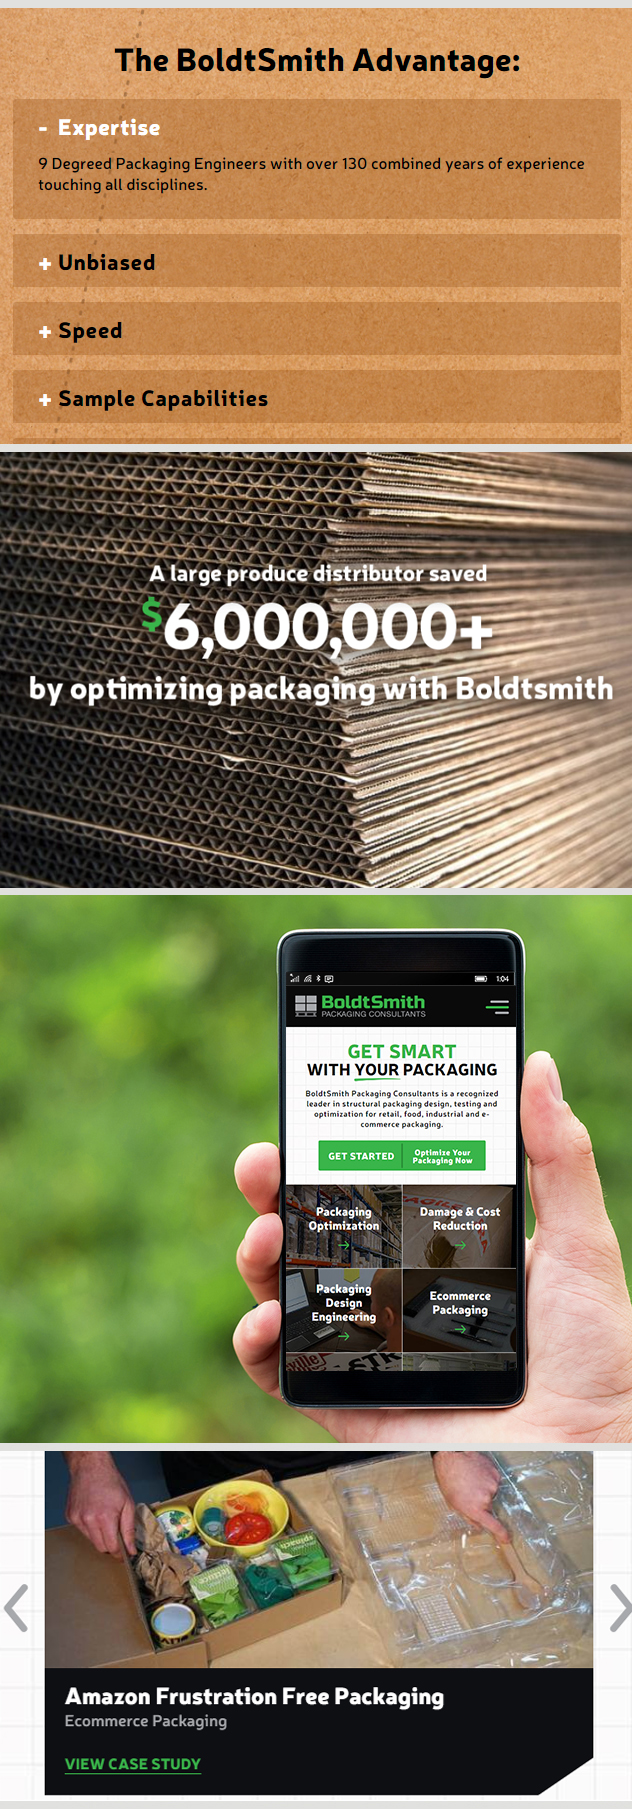 Milwaukee web marketing for Boldt Smith Packaging